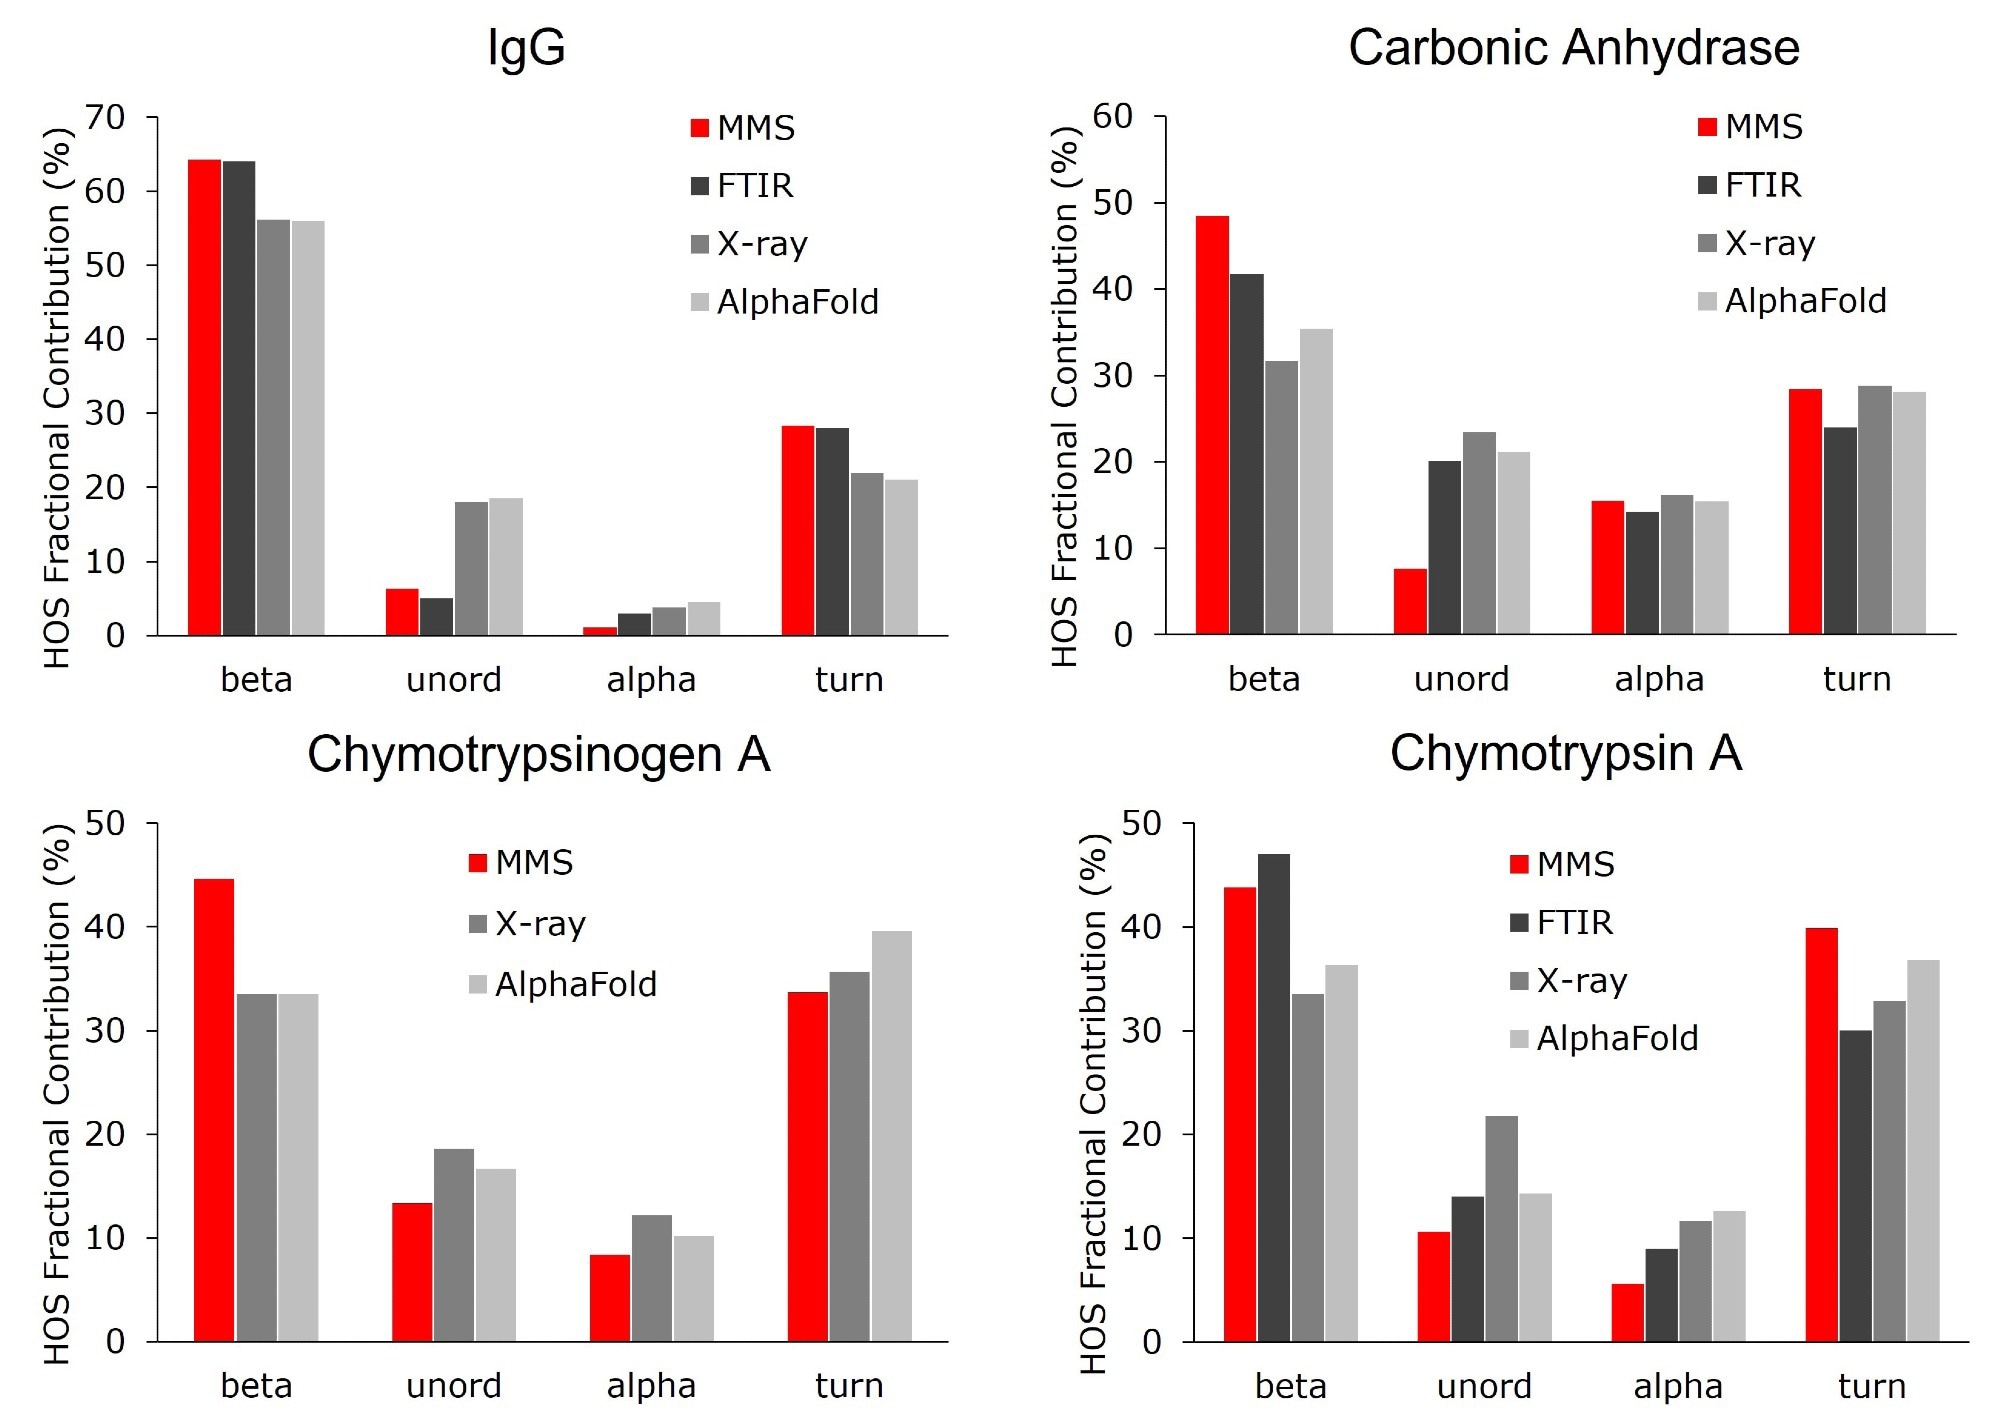 Higher order structure bar graphs showing the relative abundance of the secondary structural motifs for each protein, compared across four different structural analysis platforms: MMS, FTIR, X-ray crystallography, and AlphaFold. MMS data shown used the values from the 10 mg/mL samples. Note: there is no FTIR data available for chymotrypsinogen A.